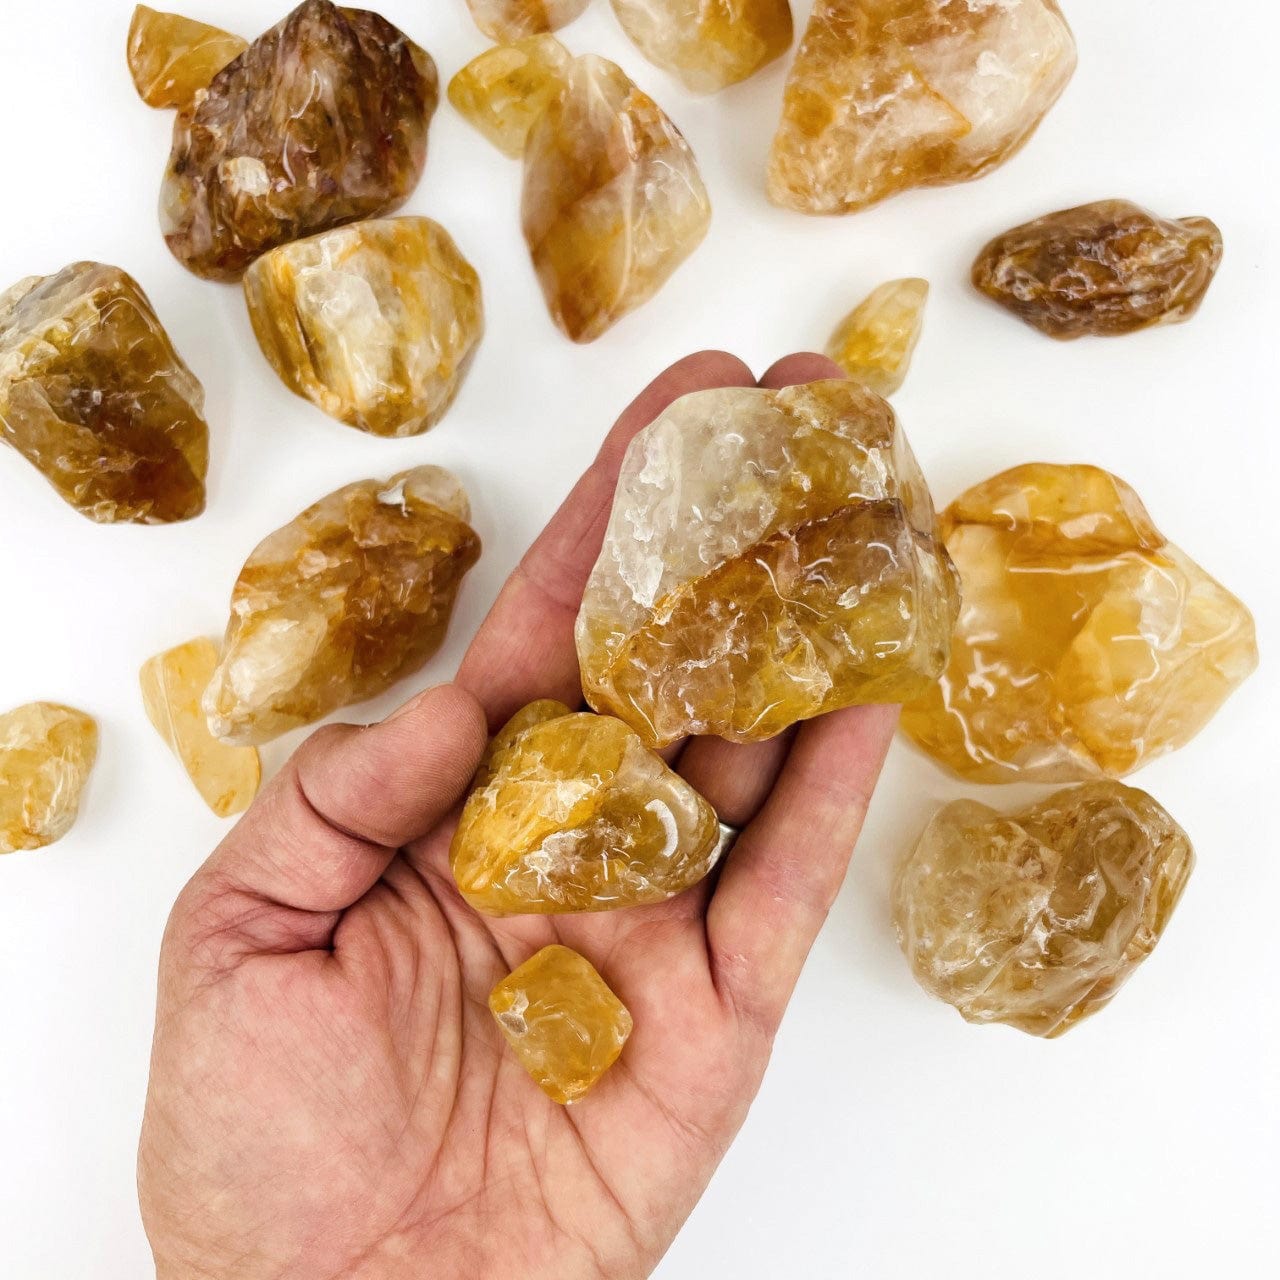 Golden Healer Quartz Polished Tumbled Stones with a few in a hand for size